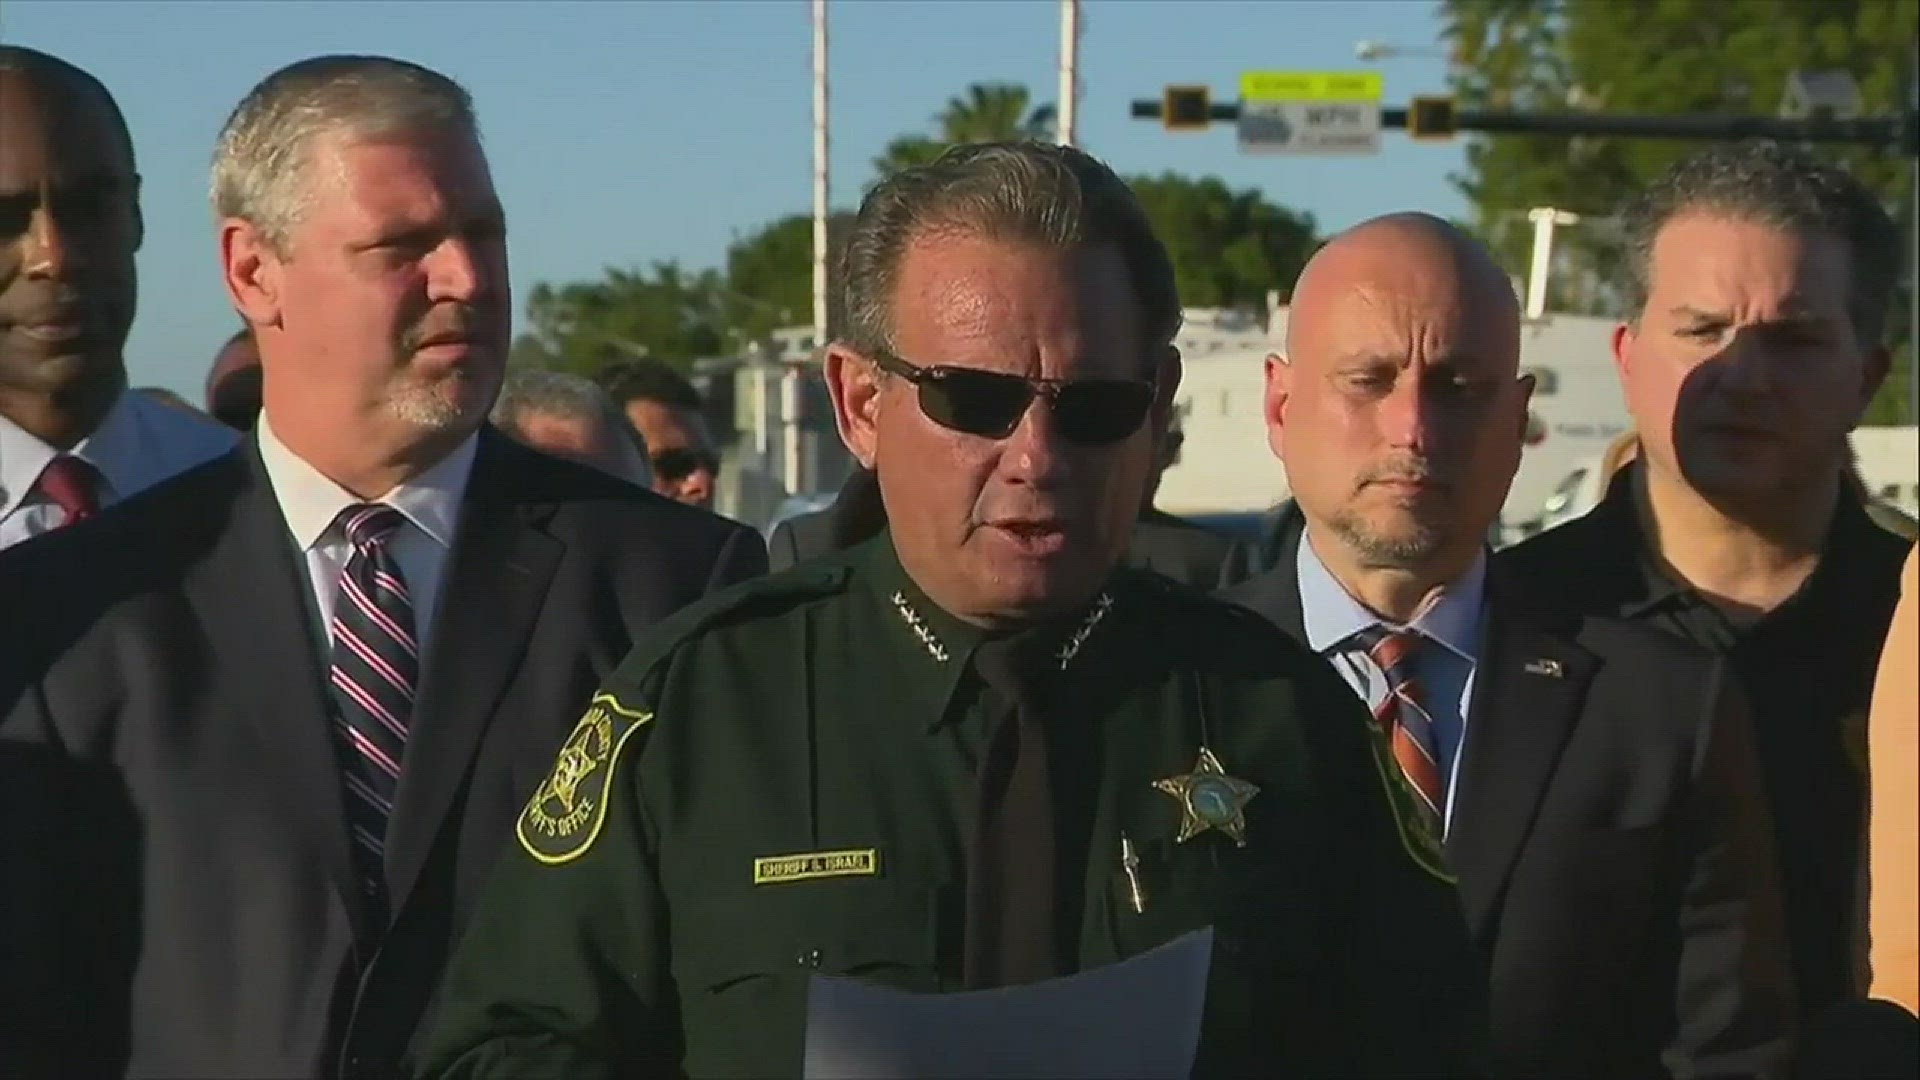 Broward County Sheriff Scott Israel provides a timeline of the rampage at a South Florida high school Wednesday. ABC